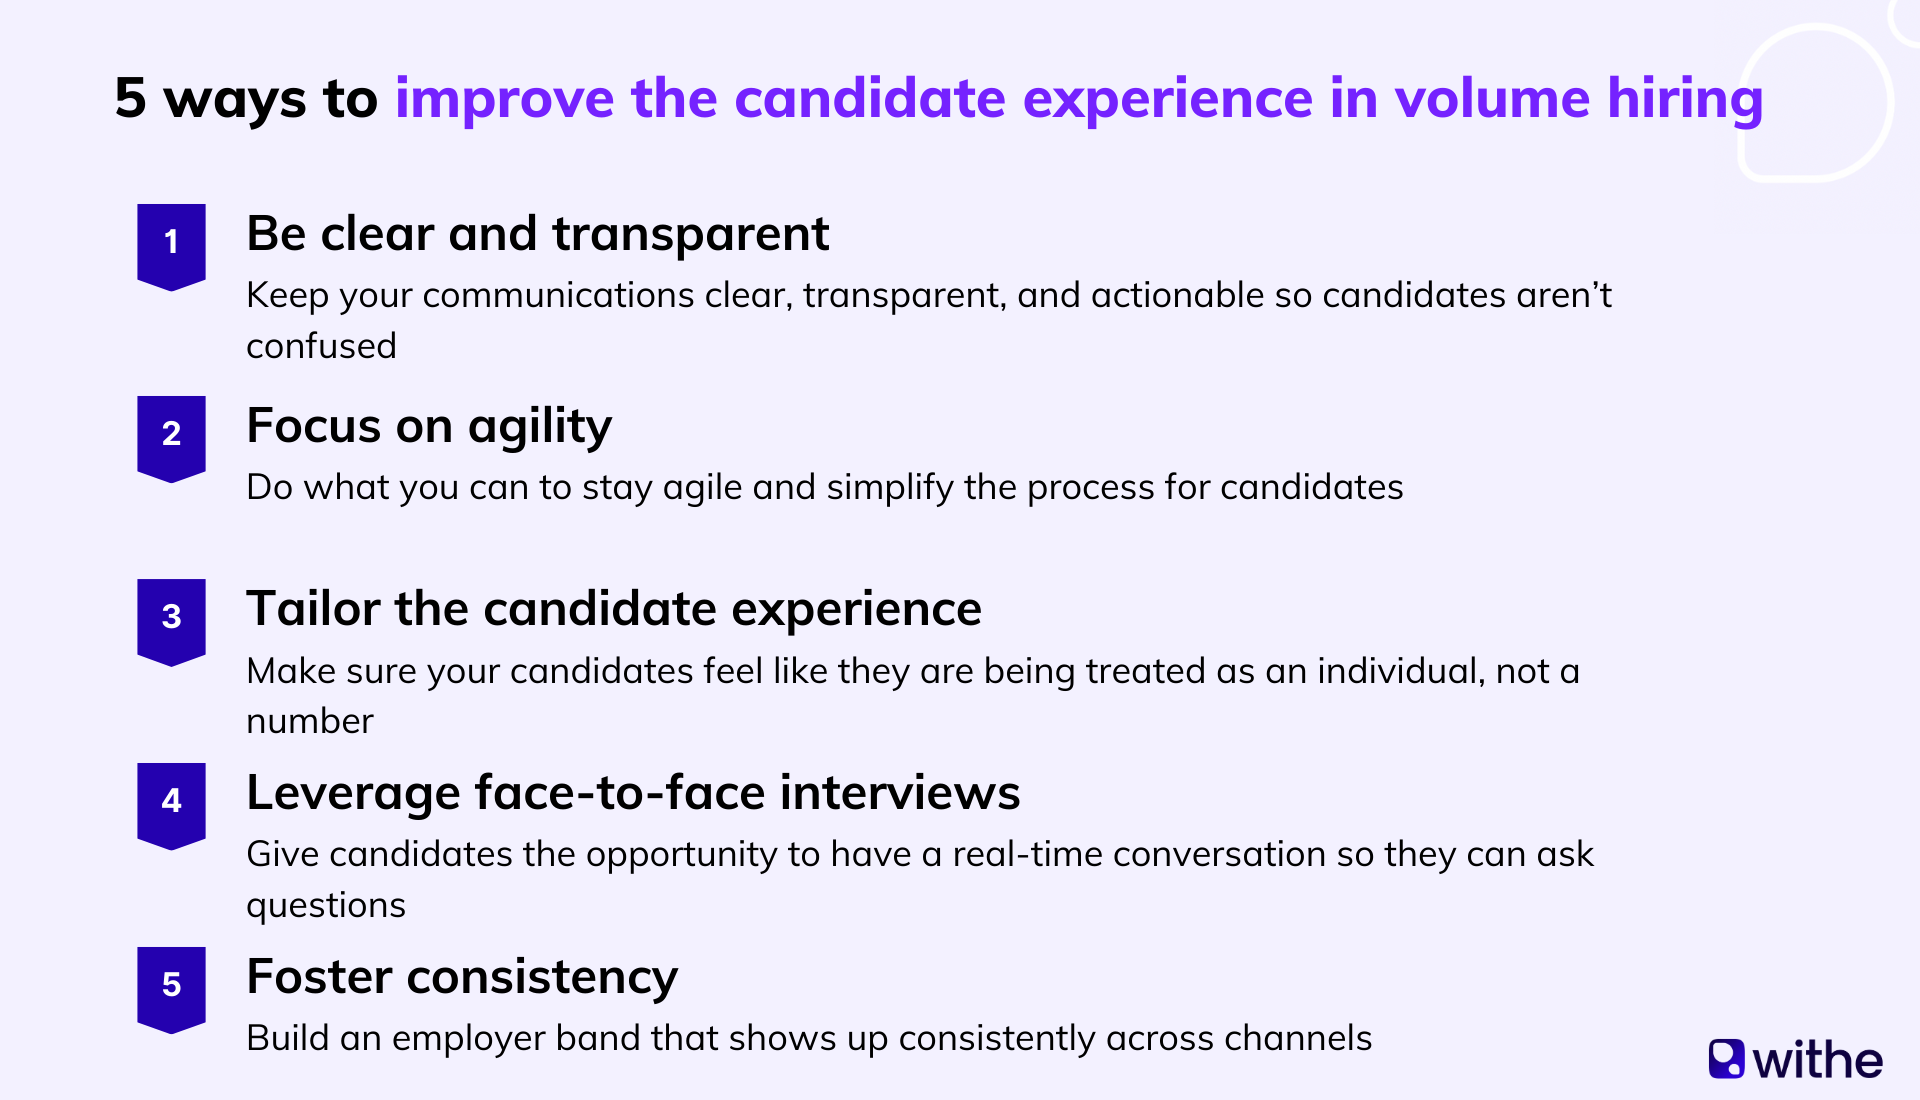 5 ways to improve the candidate experience in volume hiring